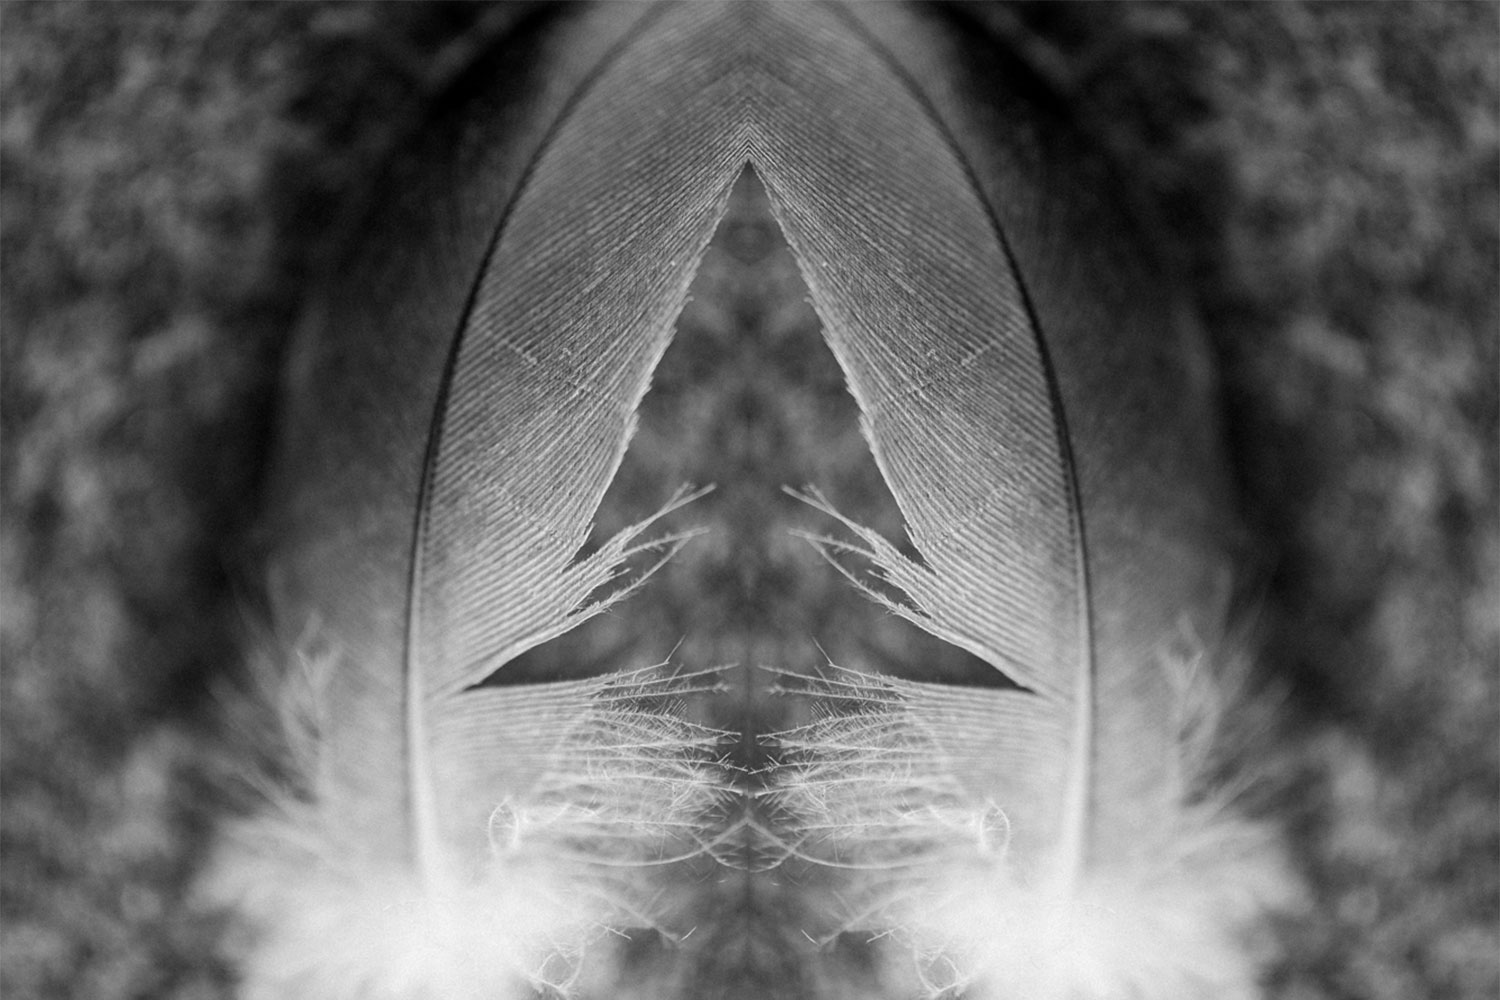 Abstract black and white photo using a feather.